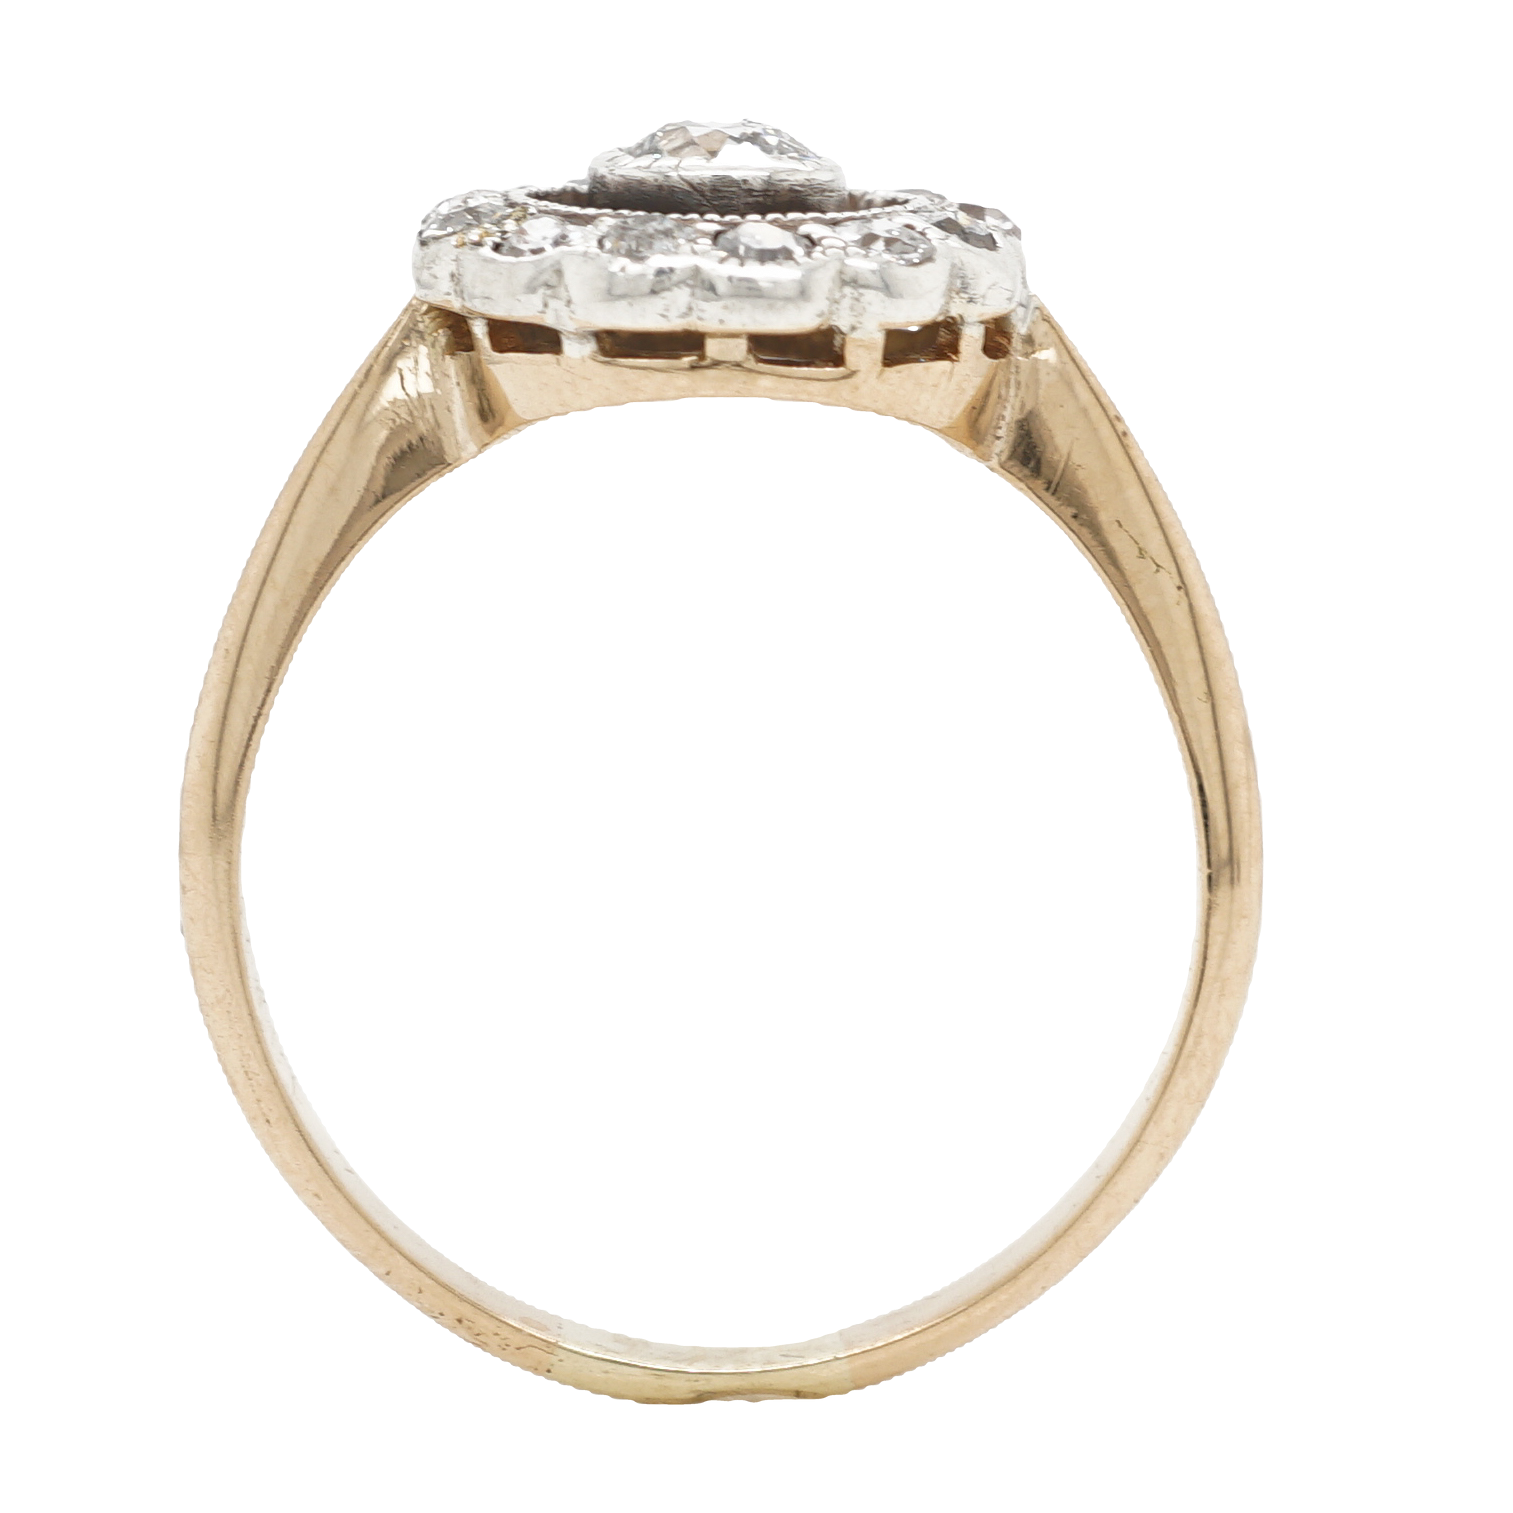 .28 Art Deco Diamond Halo Engagement Ring in Yellow Gold & PlatinumComposition: Platinum Ring Size: 7.5 Total Diamond Weight: .54ct Total Gram Weight: 2.9 g